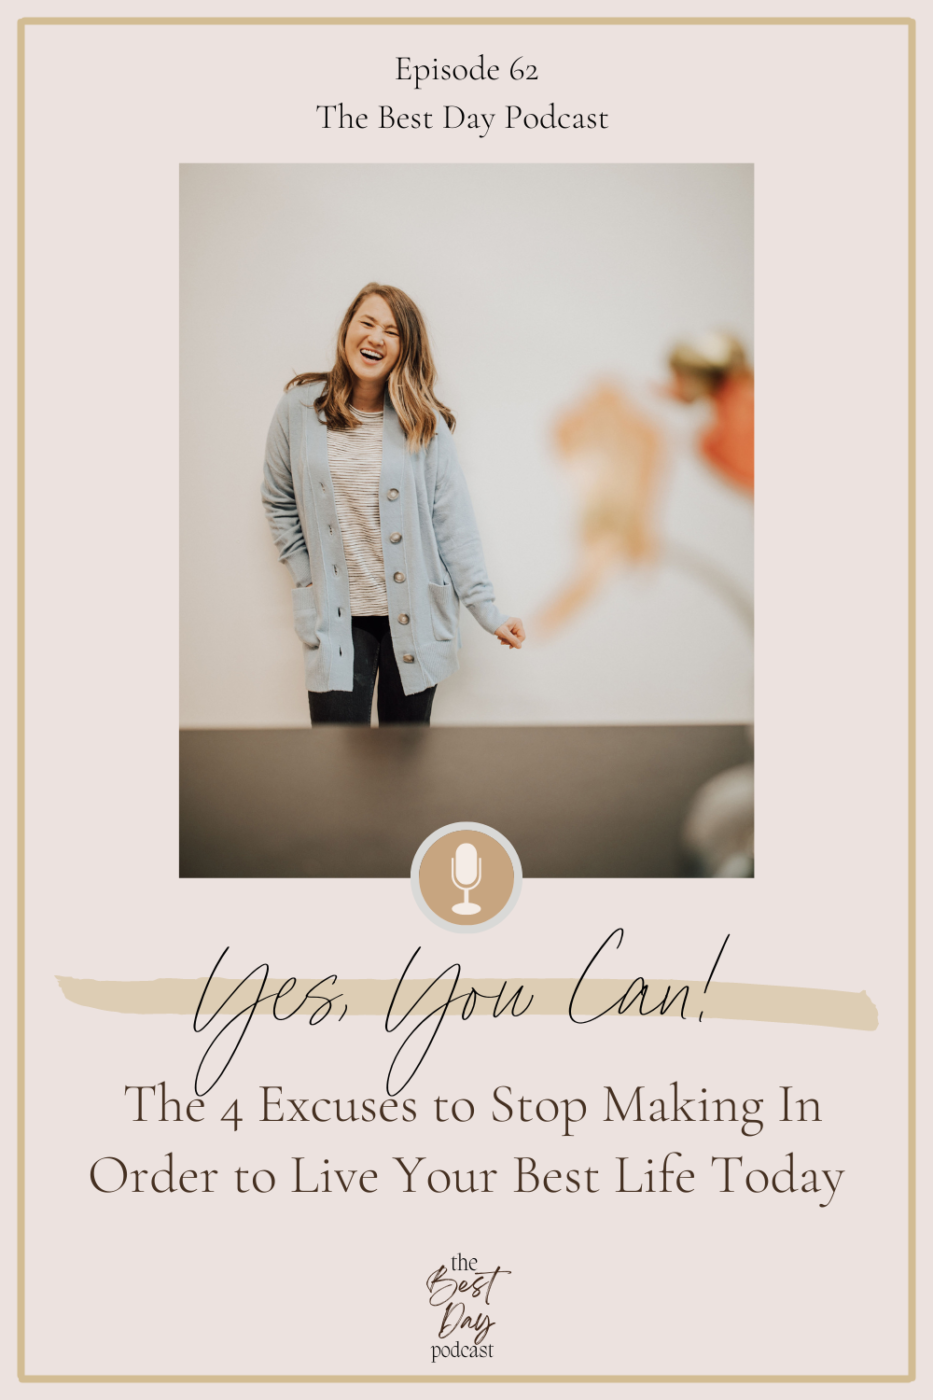 4 excuses to stop making to live your best life